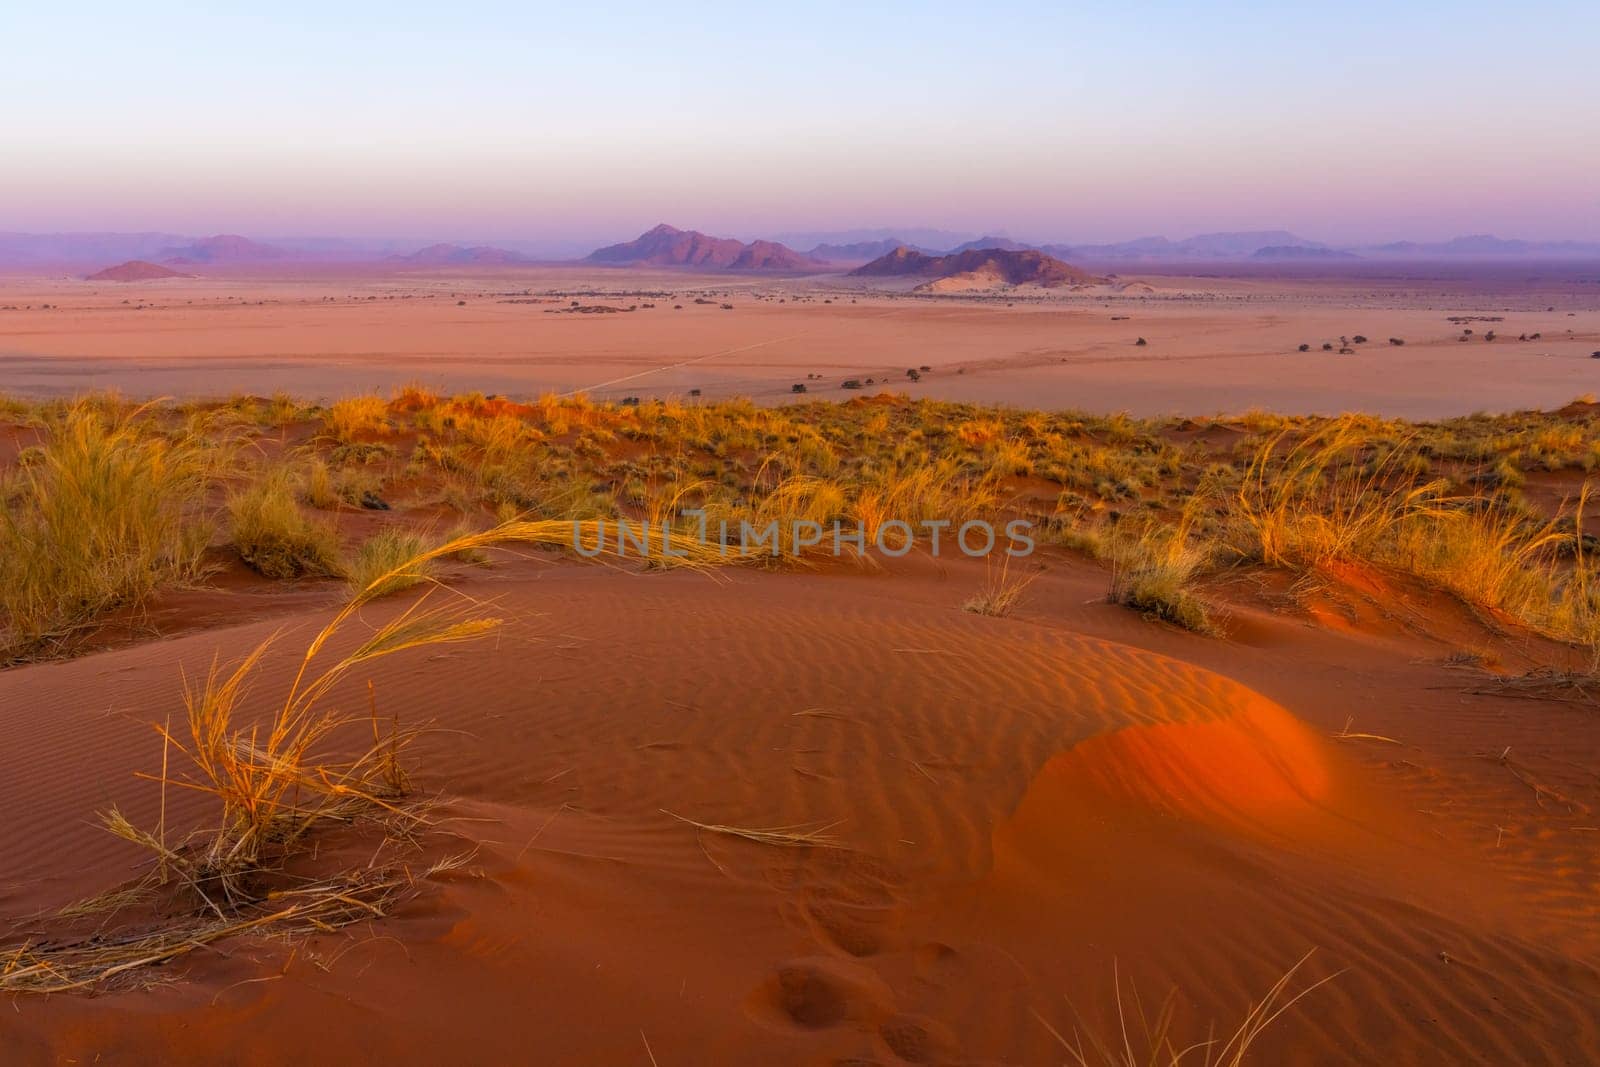 View of Sesriem at sunset from the top of the Elim dune in Namibia in Africa.